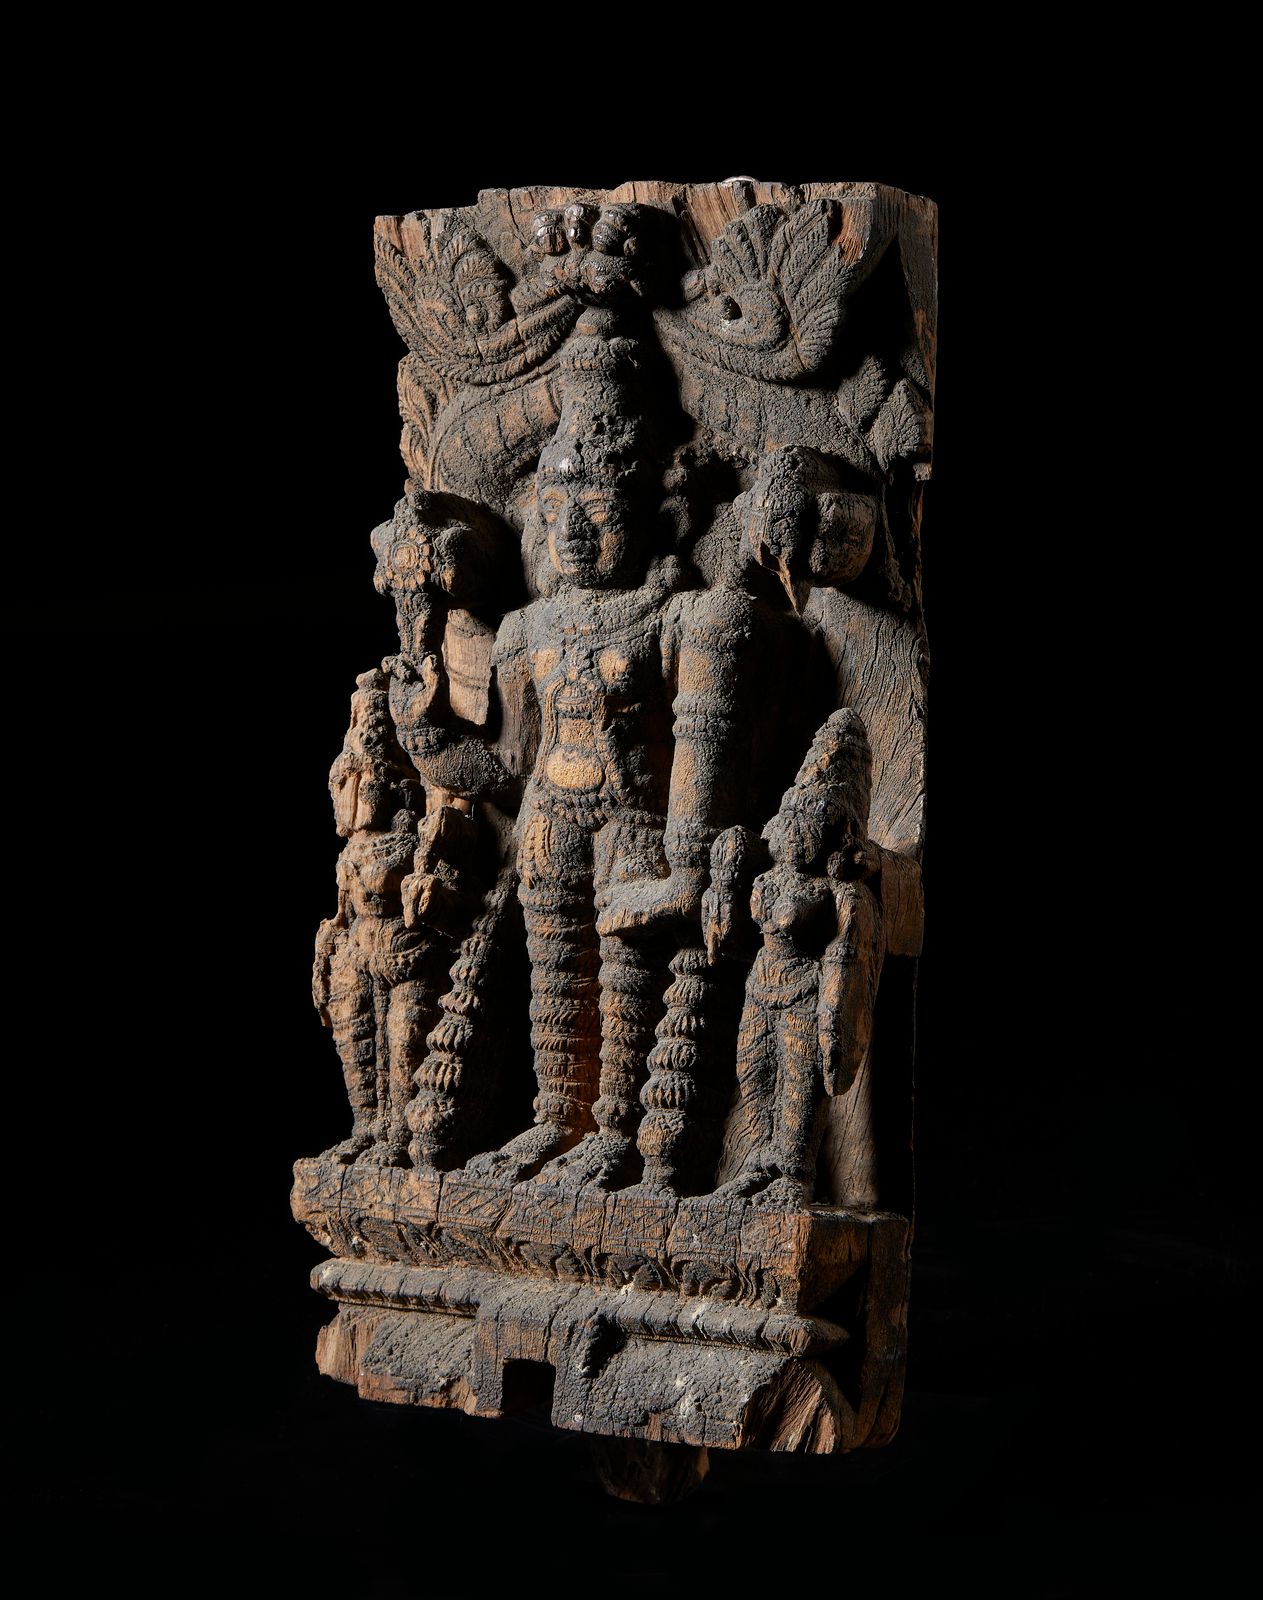 Indian Art A wooden panel depicting Lord Vishnu and consorts Indische Kunst. Ein&hellip;